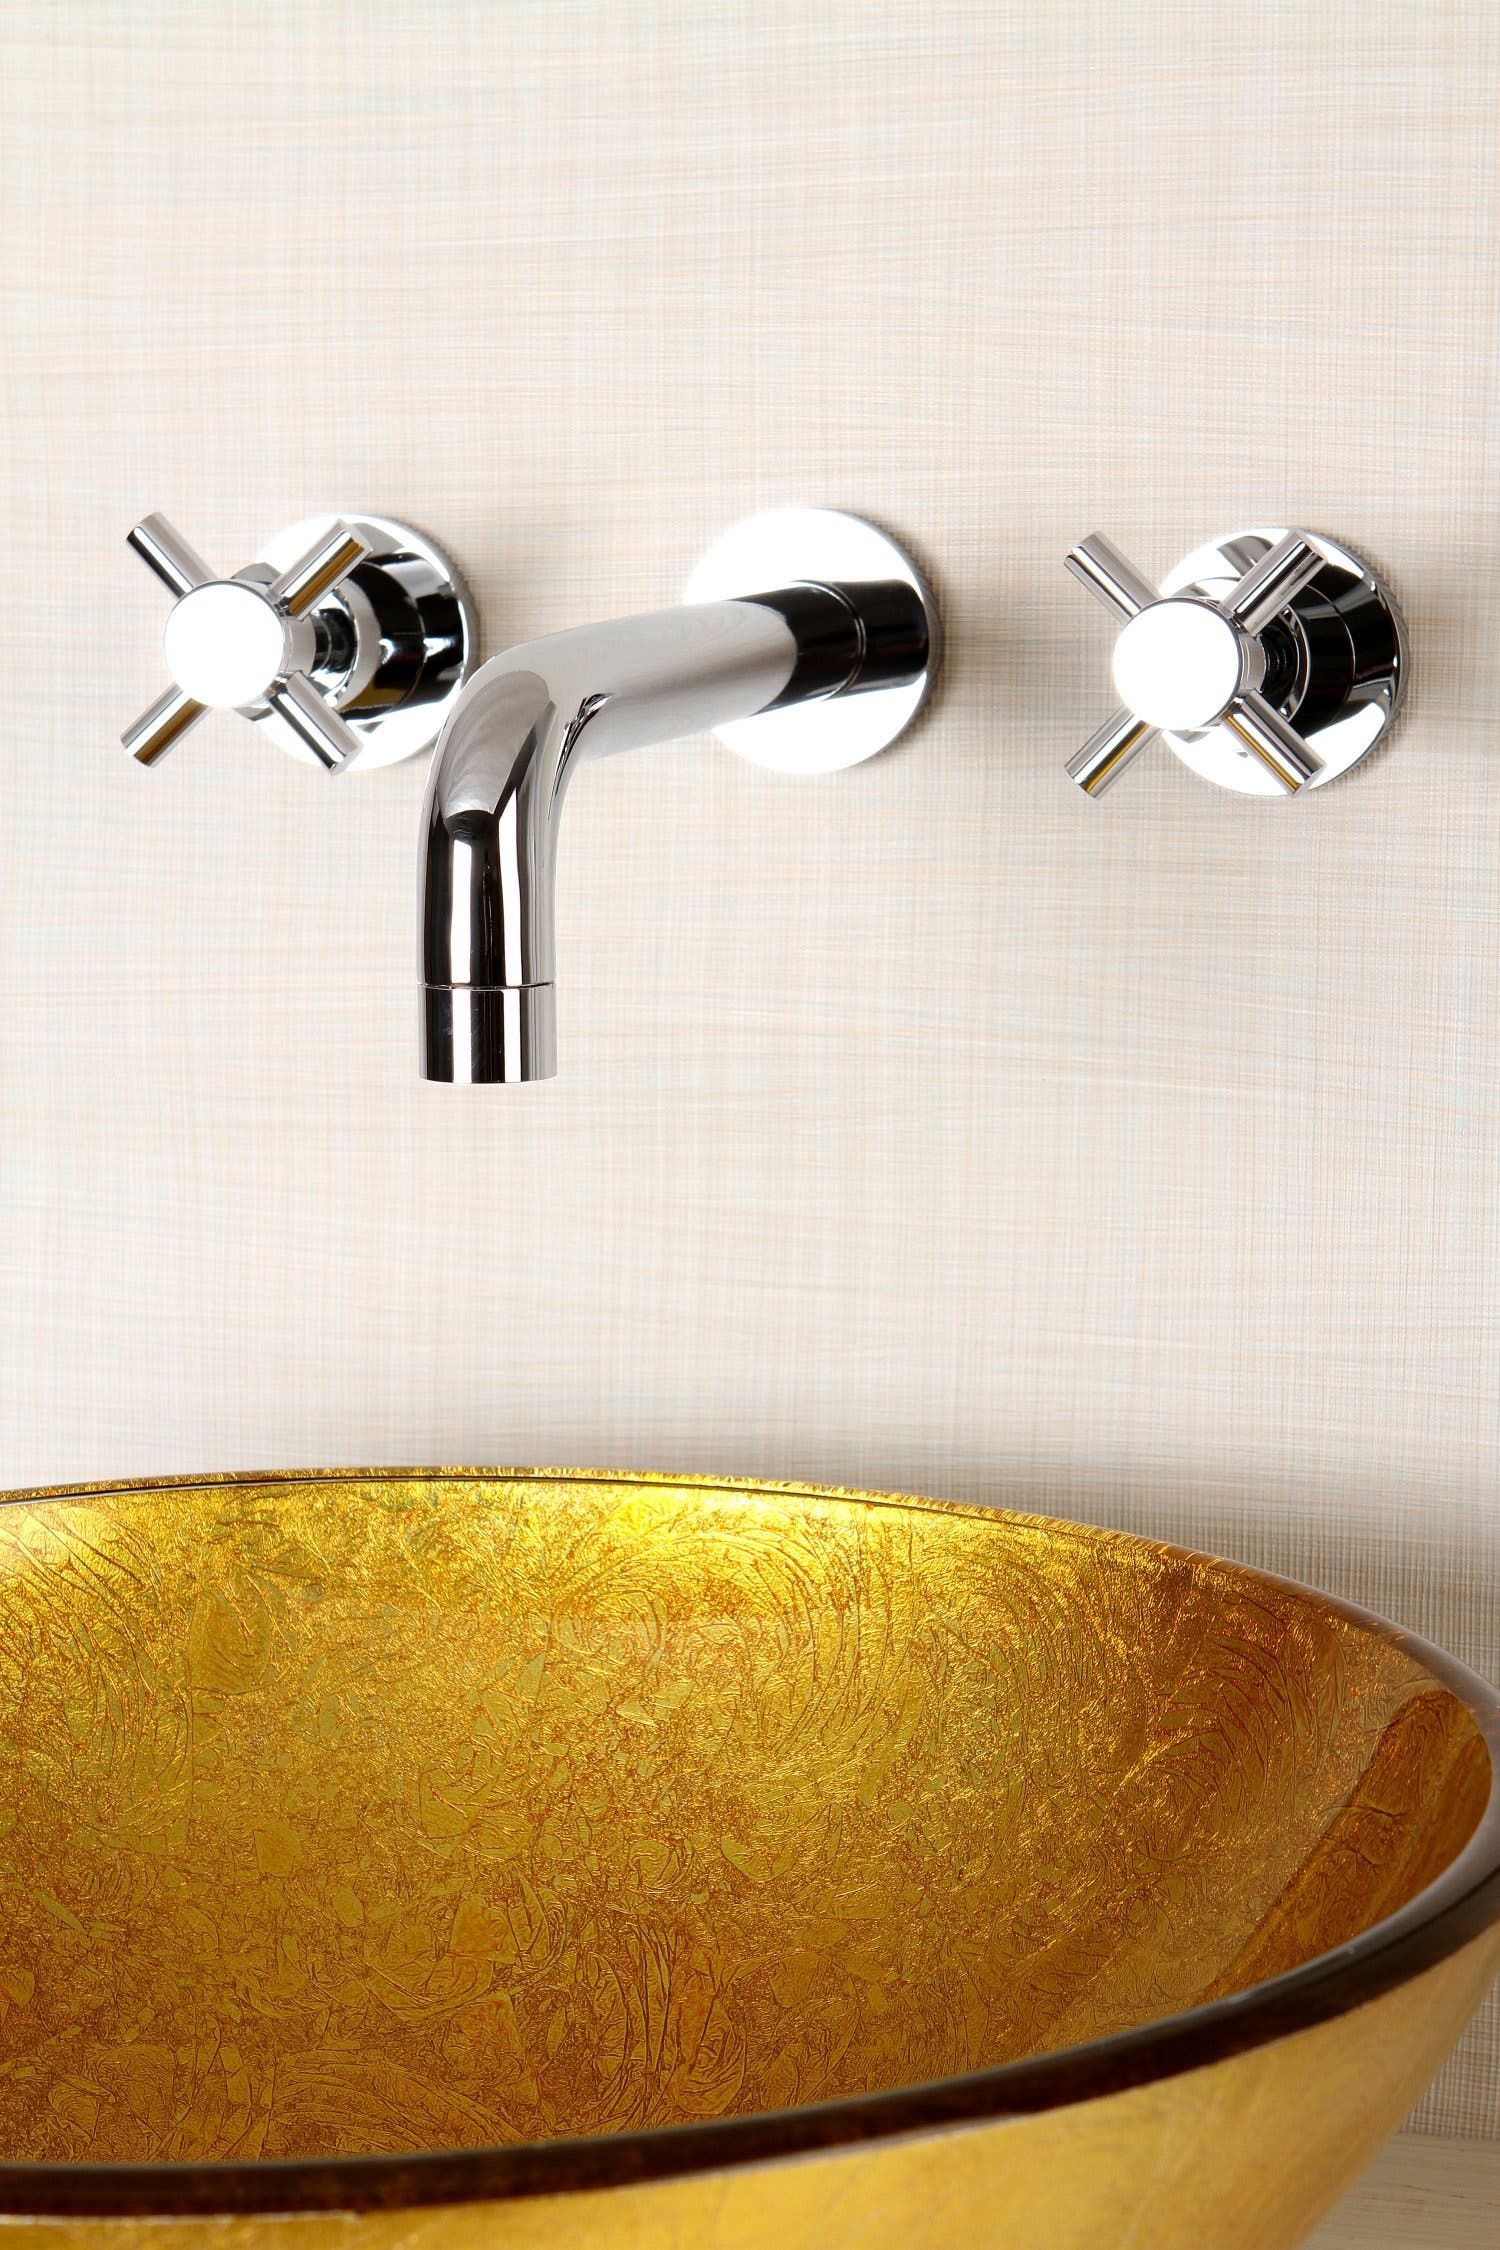 The Fauceture Vessel Sink Will Uplift Your Home, EVSPFB6